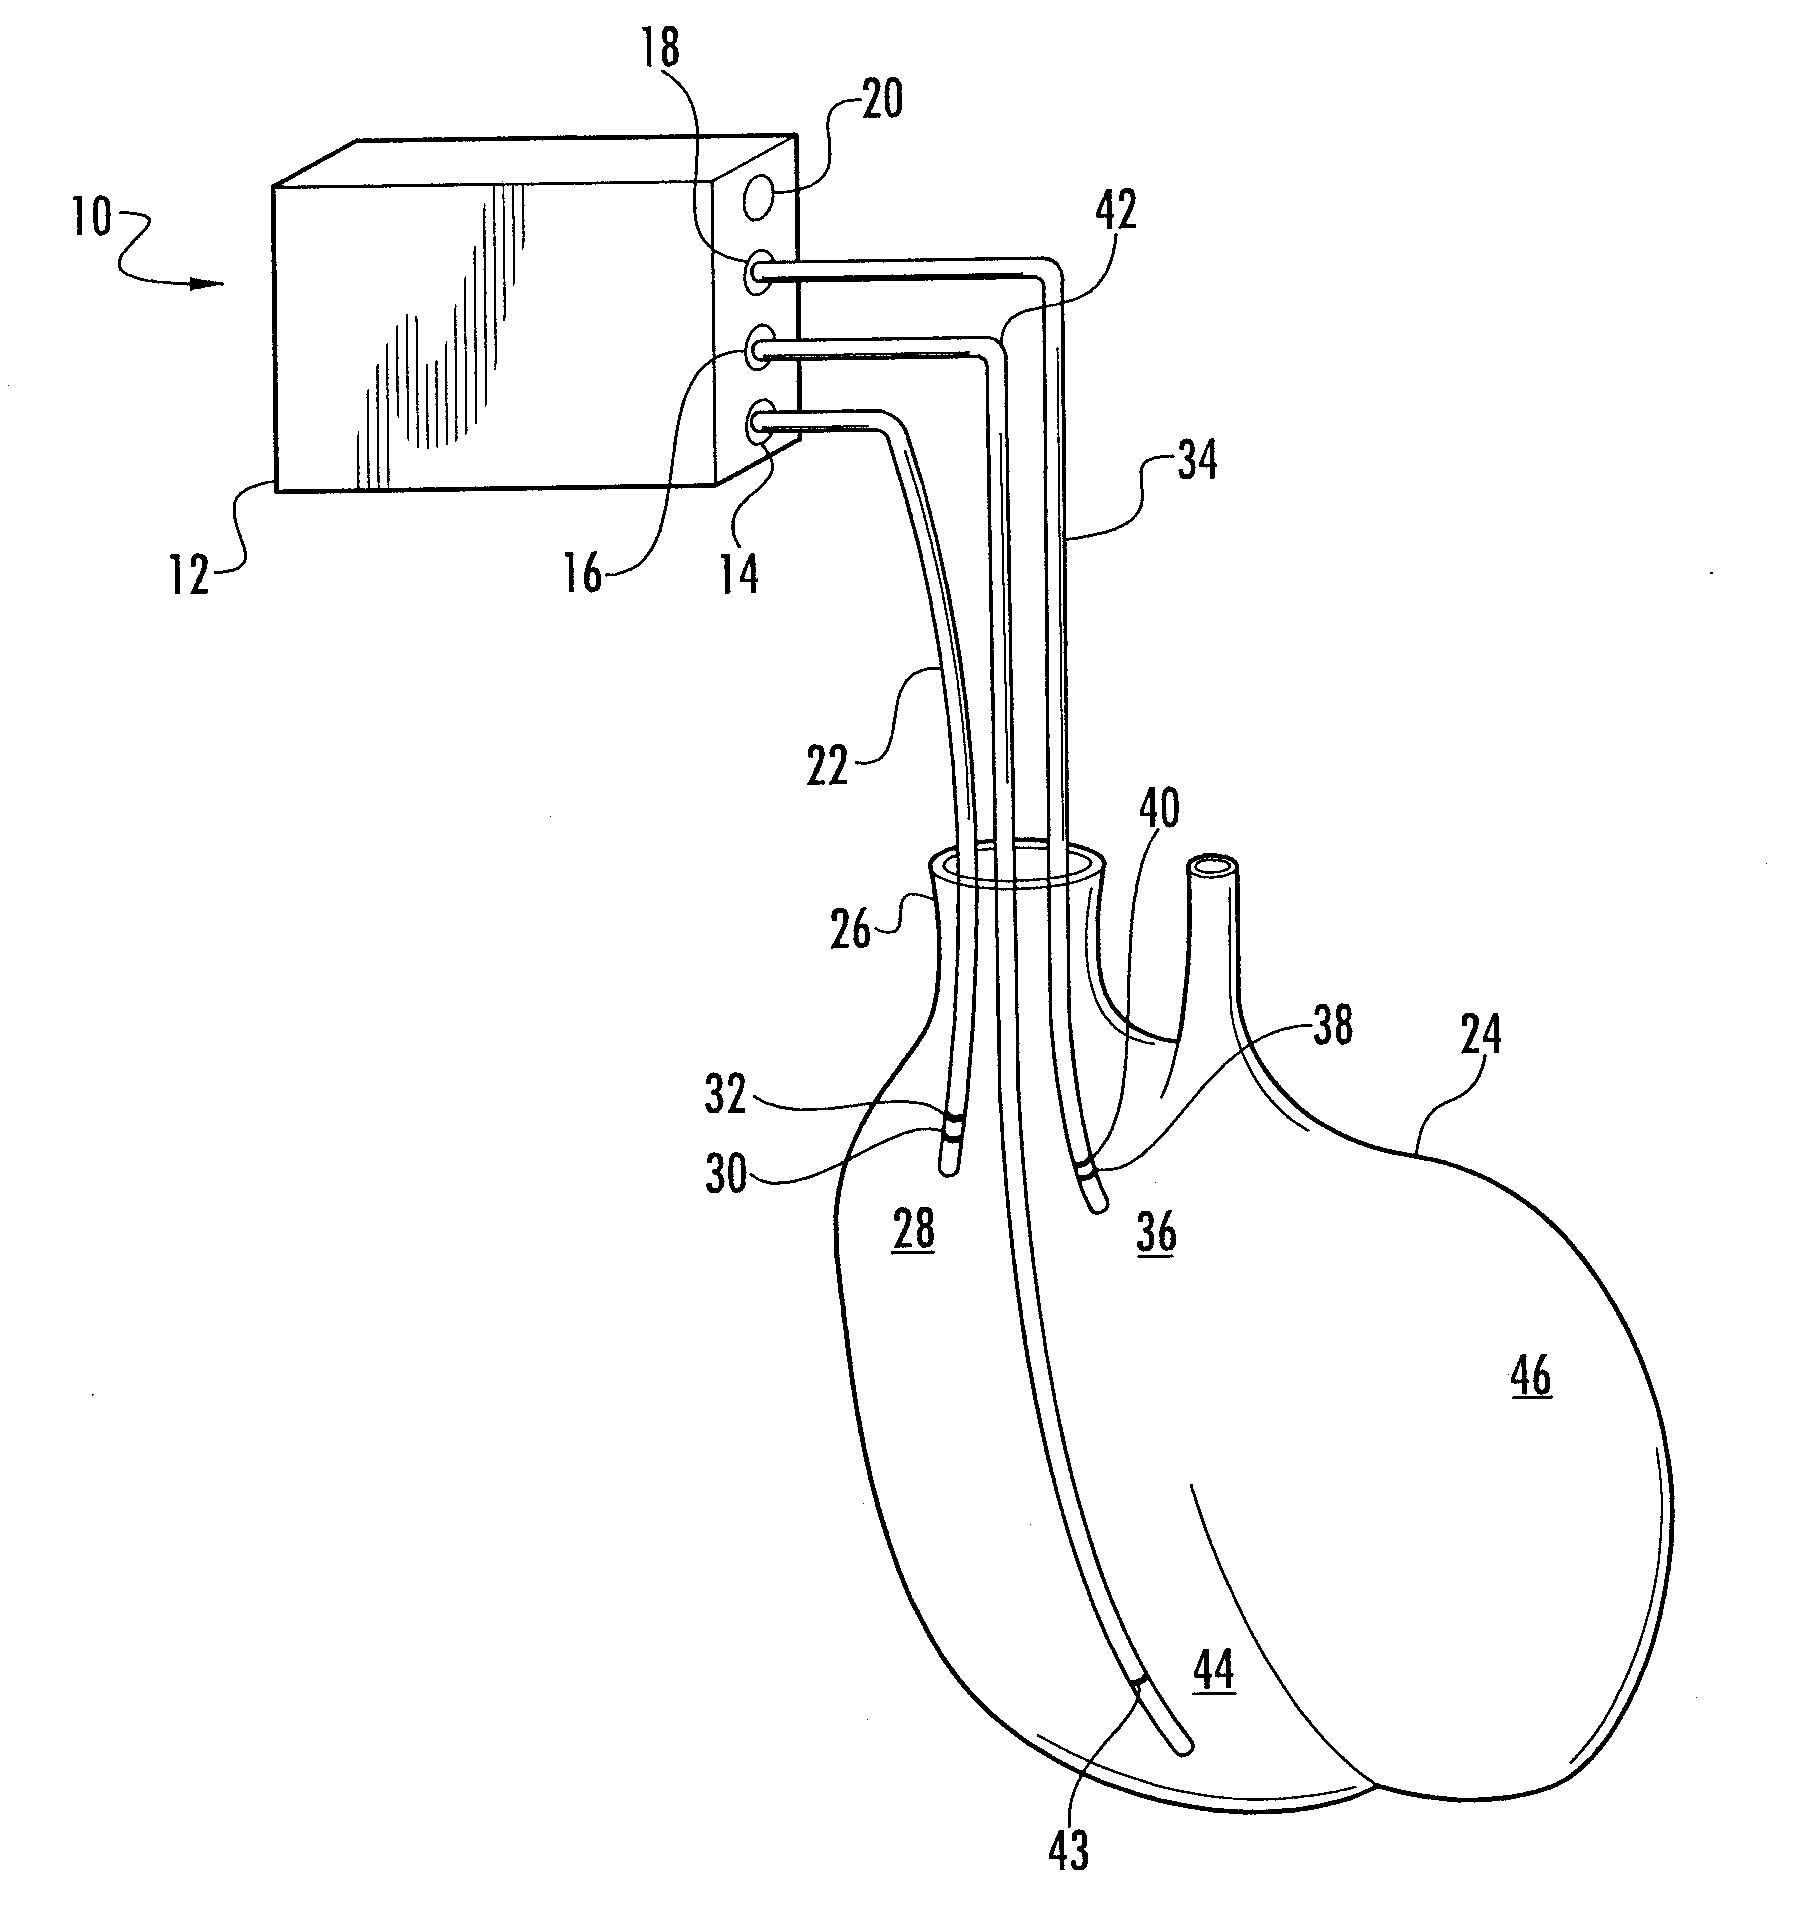 Device And Method For Peri-Hisian Pacing And/Or Simultaneous Bi-Ventricular or Tri-Ventricular Pacing For Cardiac Resynchronization